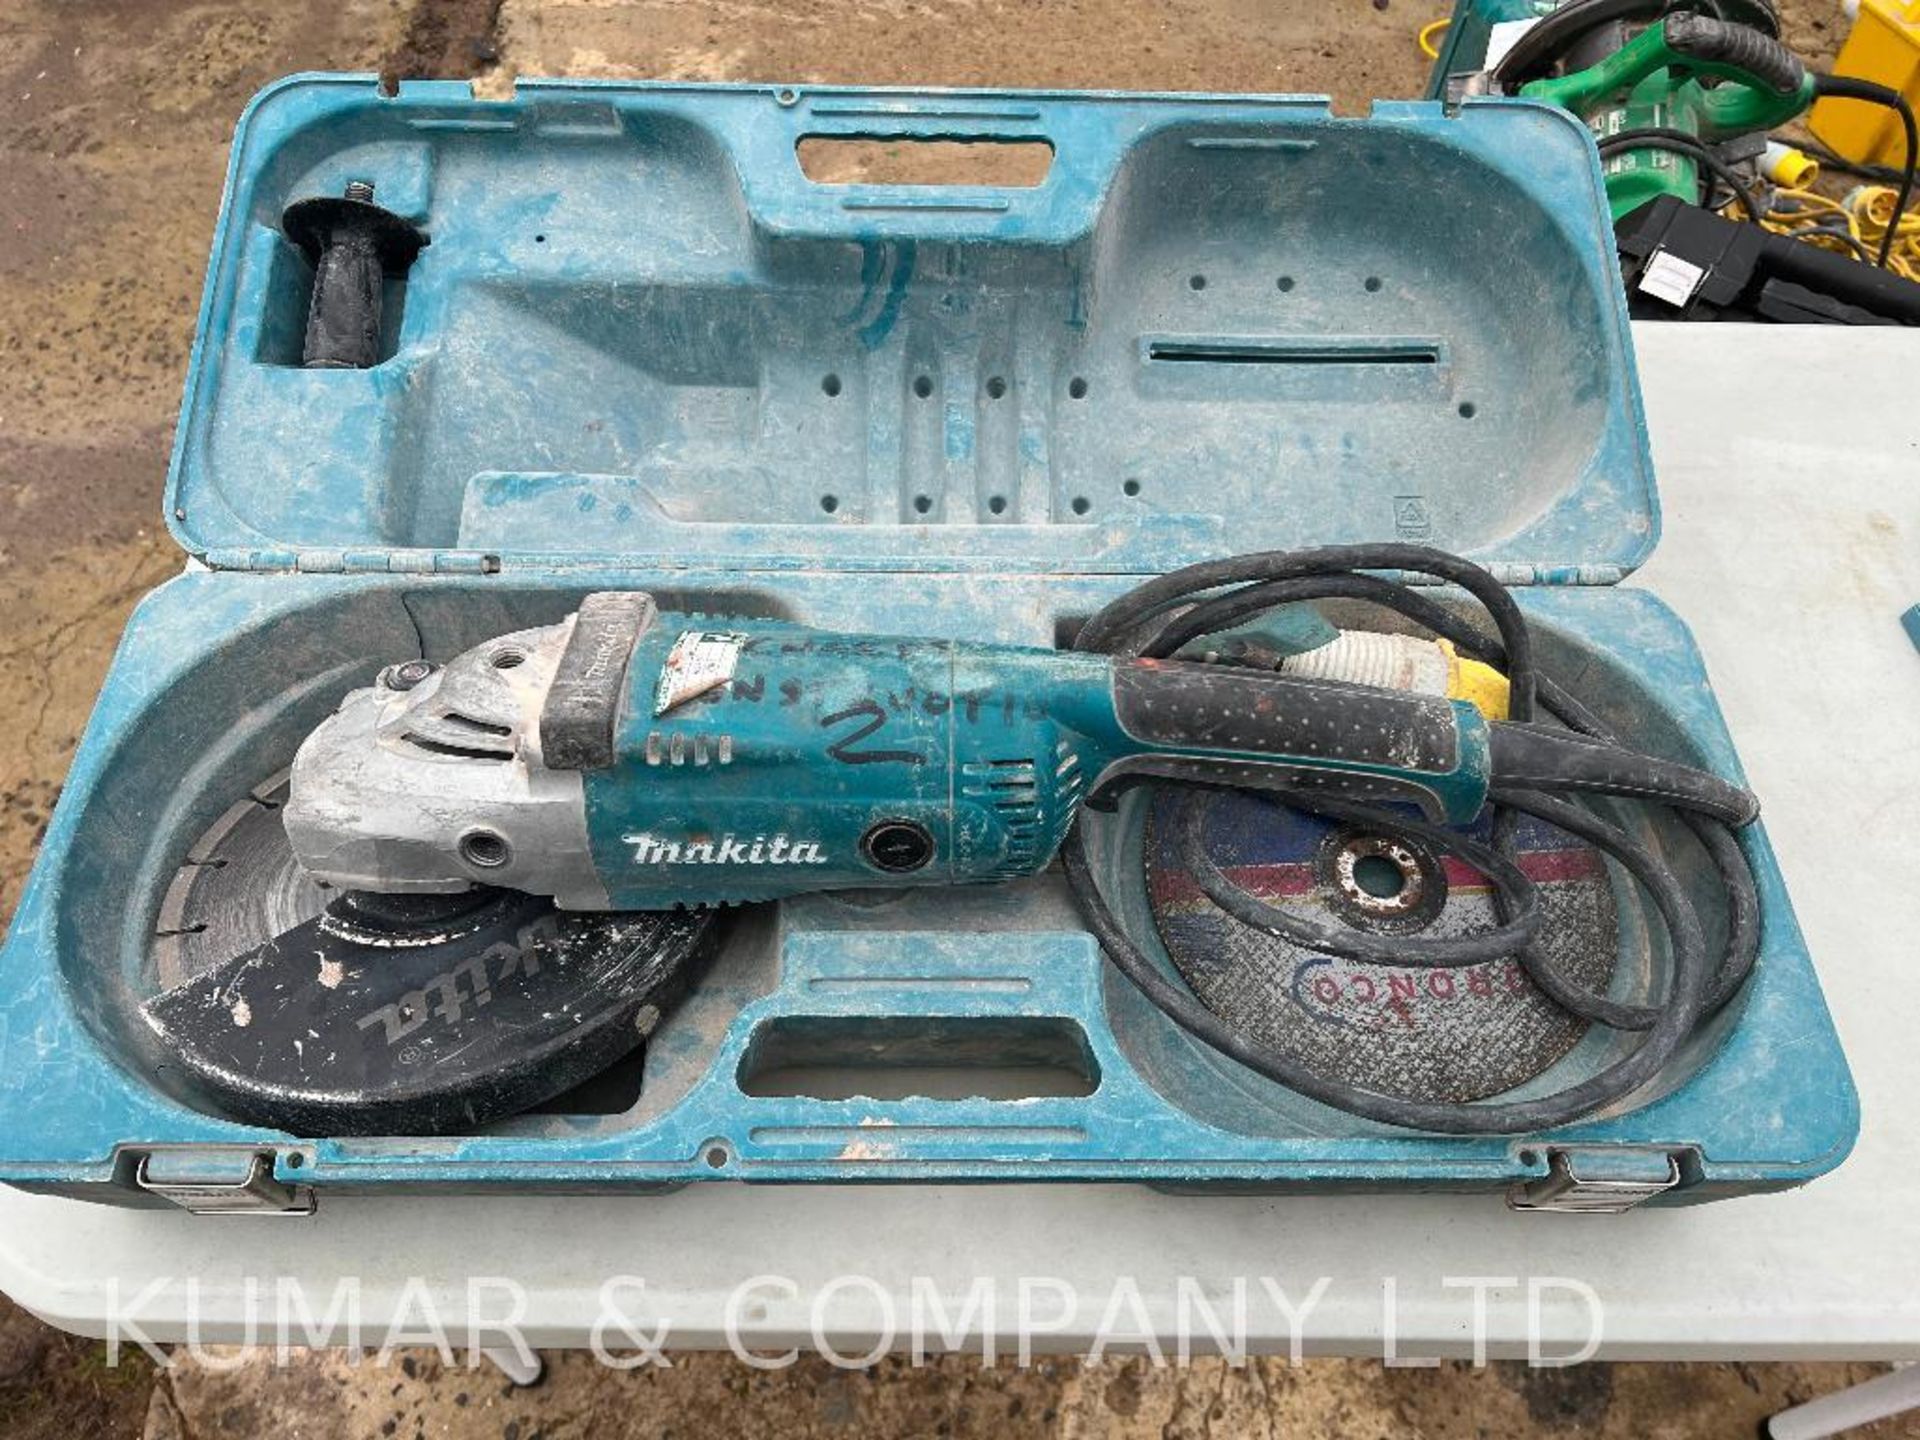 Makita GA9020 230mm 110v Angle Grinder in Case as Shown. PLEASE NOTE: THIS LOT IS LOCATED IN CARDIFF